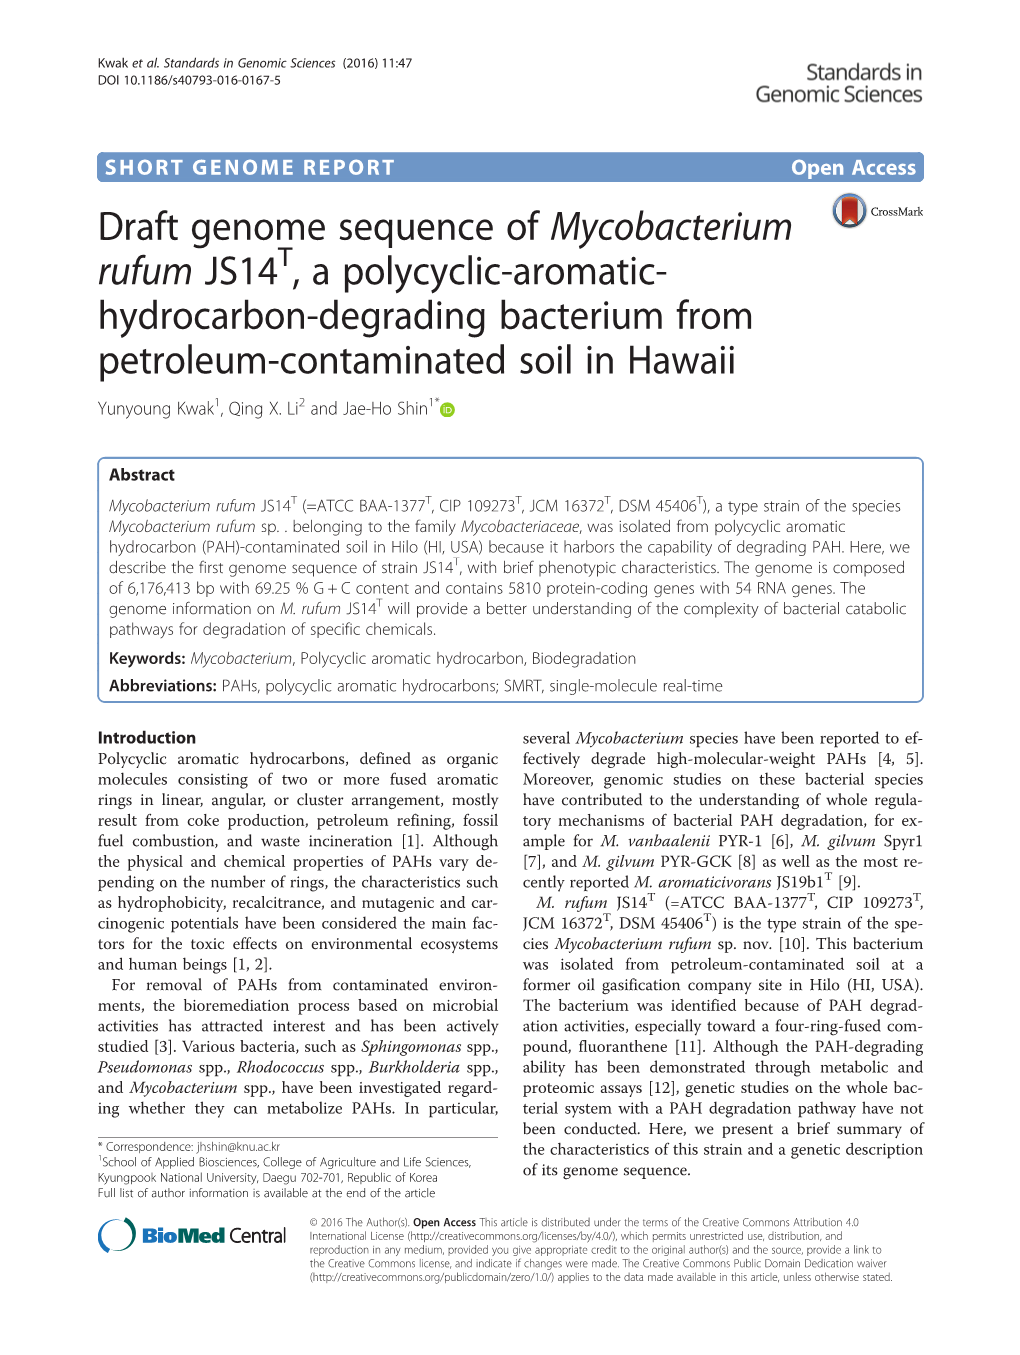 Draft Genome Sequence of Mycobacterium Rufum JS14T, A